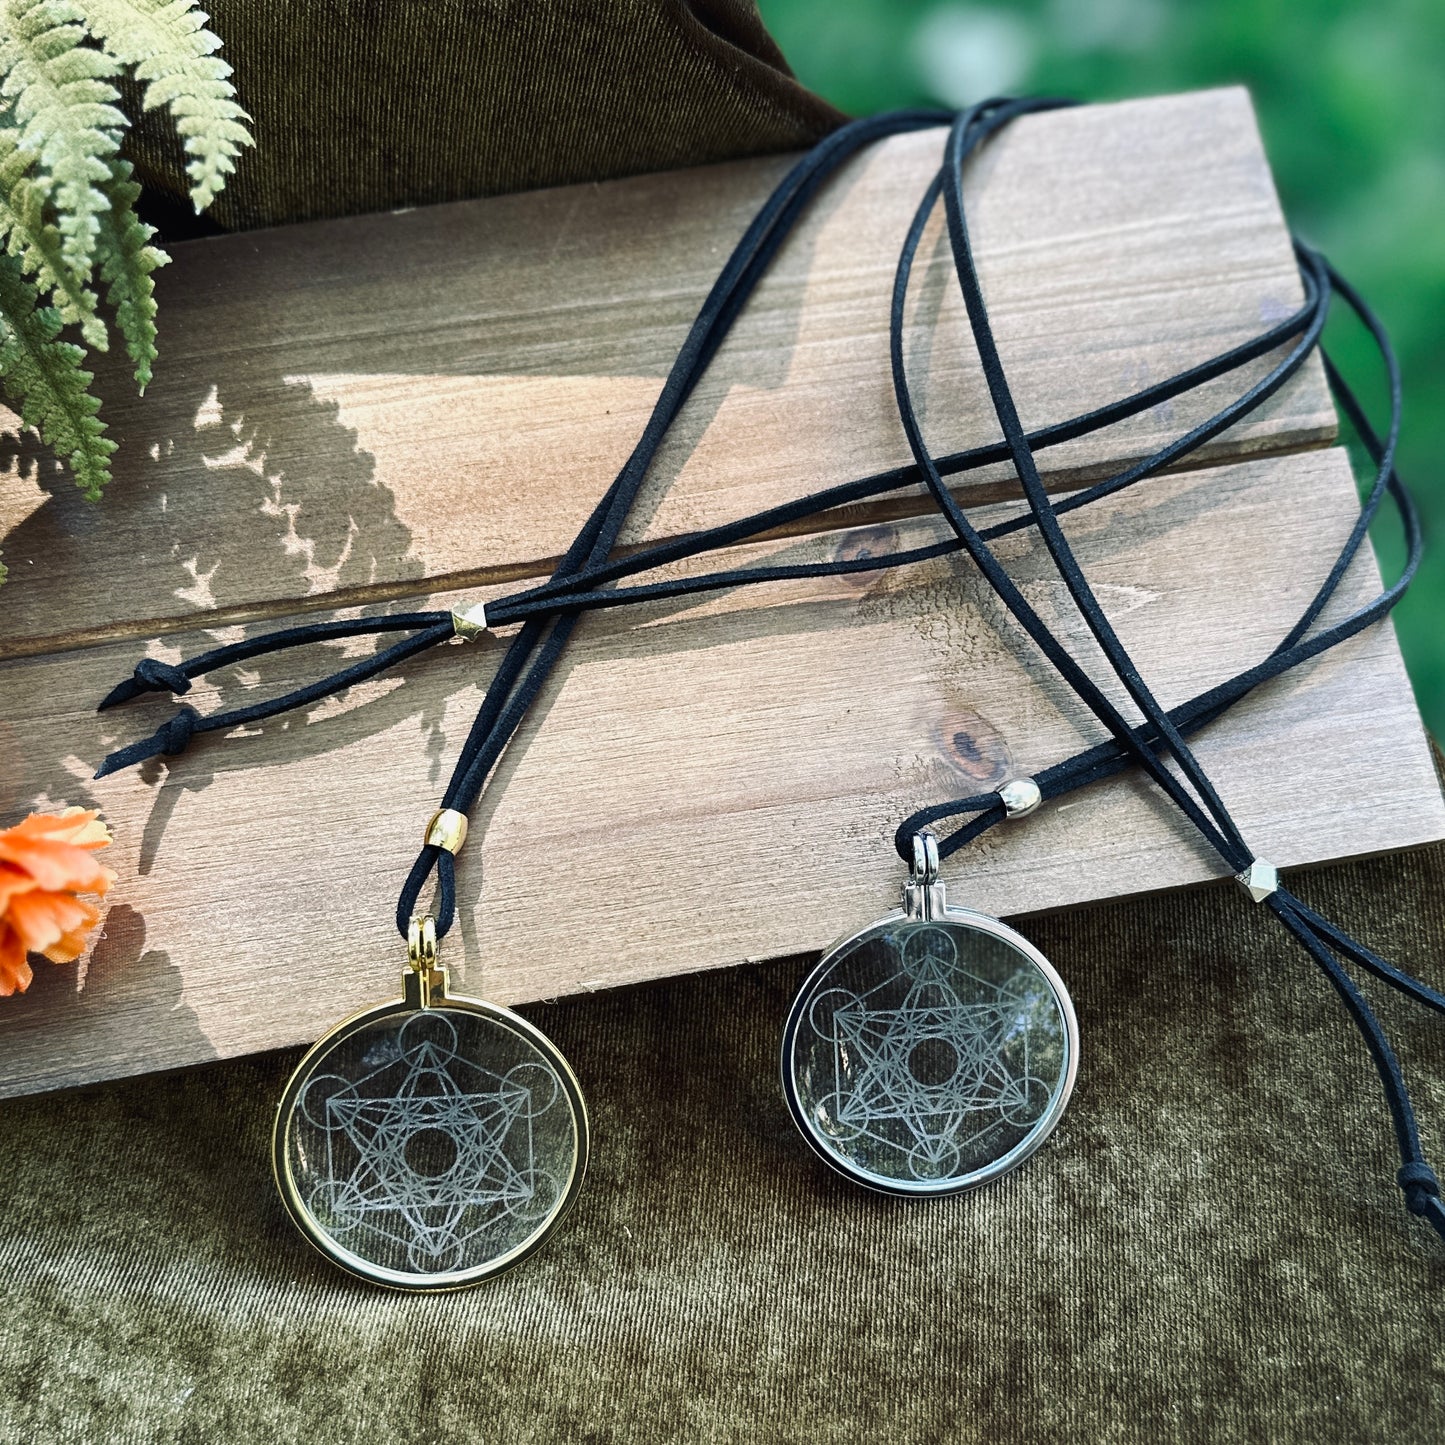 Sacred Geometry Necklace, Metatron's Cube Solar Lighter, Magnifying Glass Necklace, Sustainable Jewelry, Cannabis Accessory